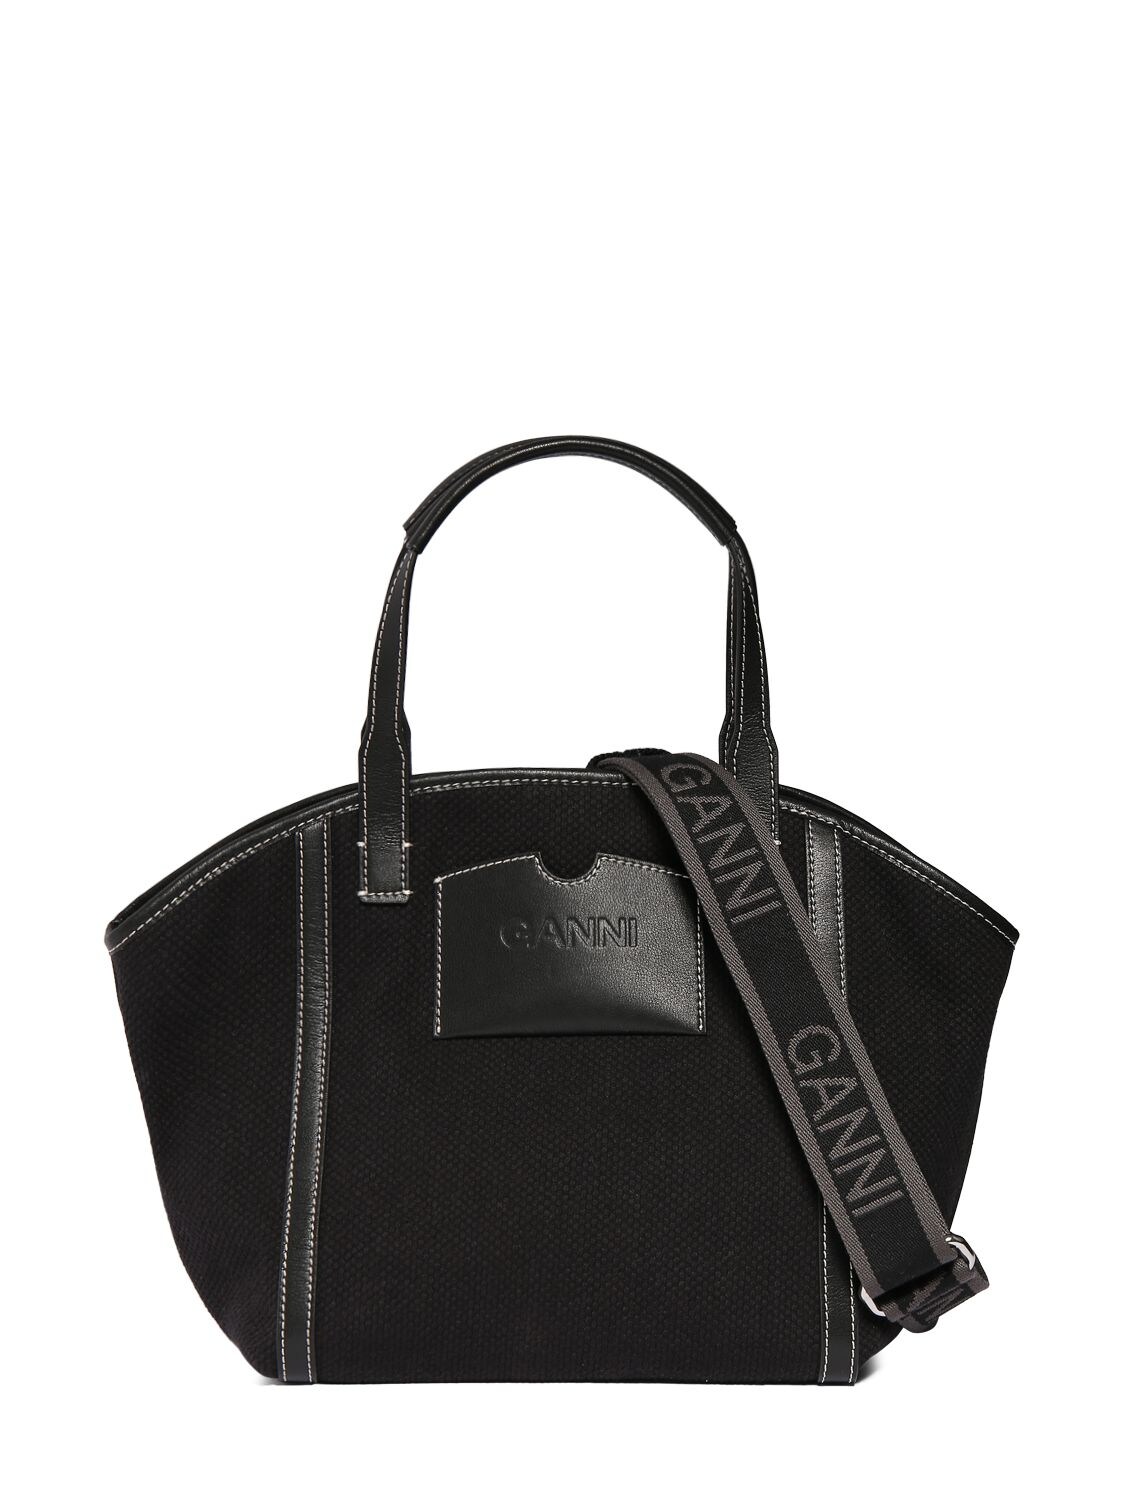 Ganni Black Leather Double Top Handle Logo Contrast Stitching Tote Bag